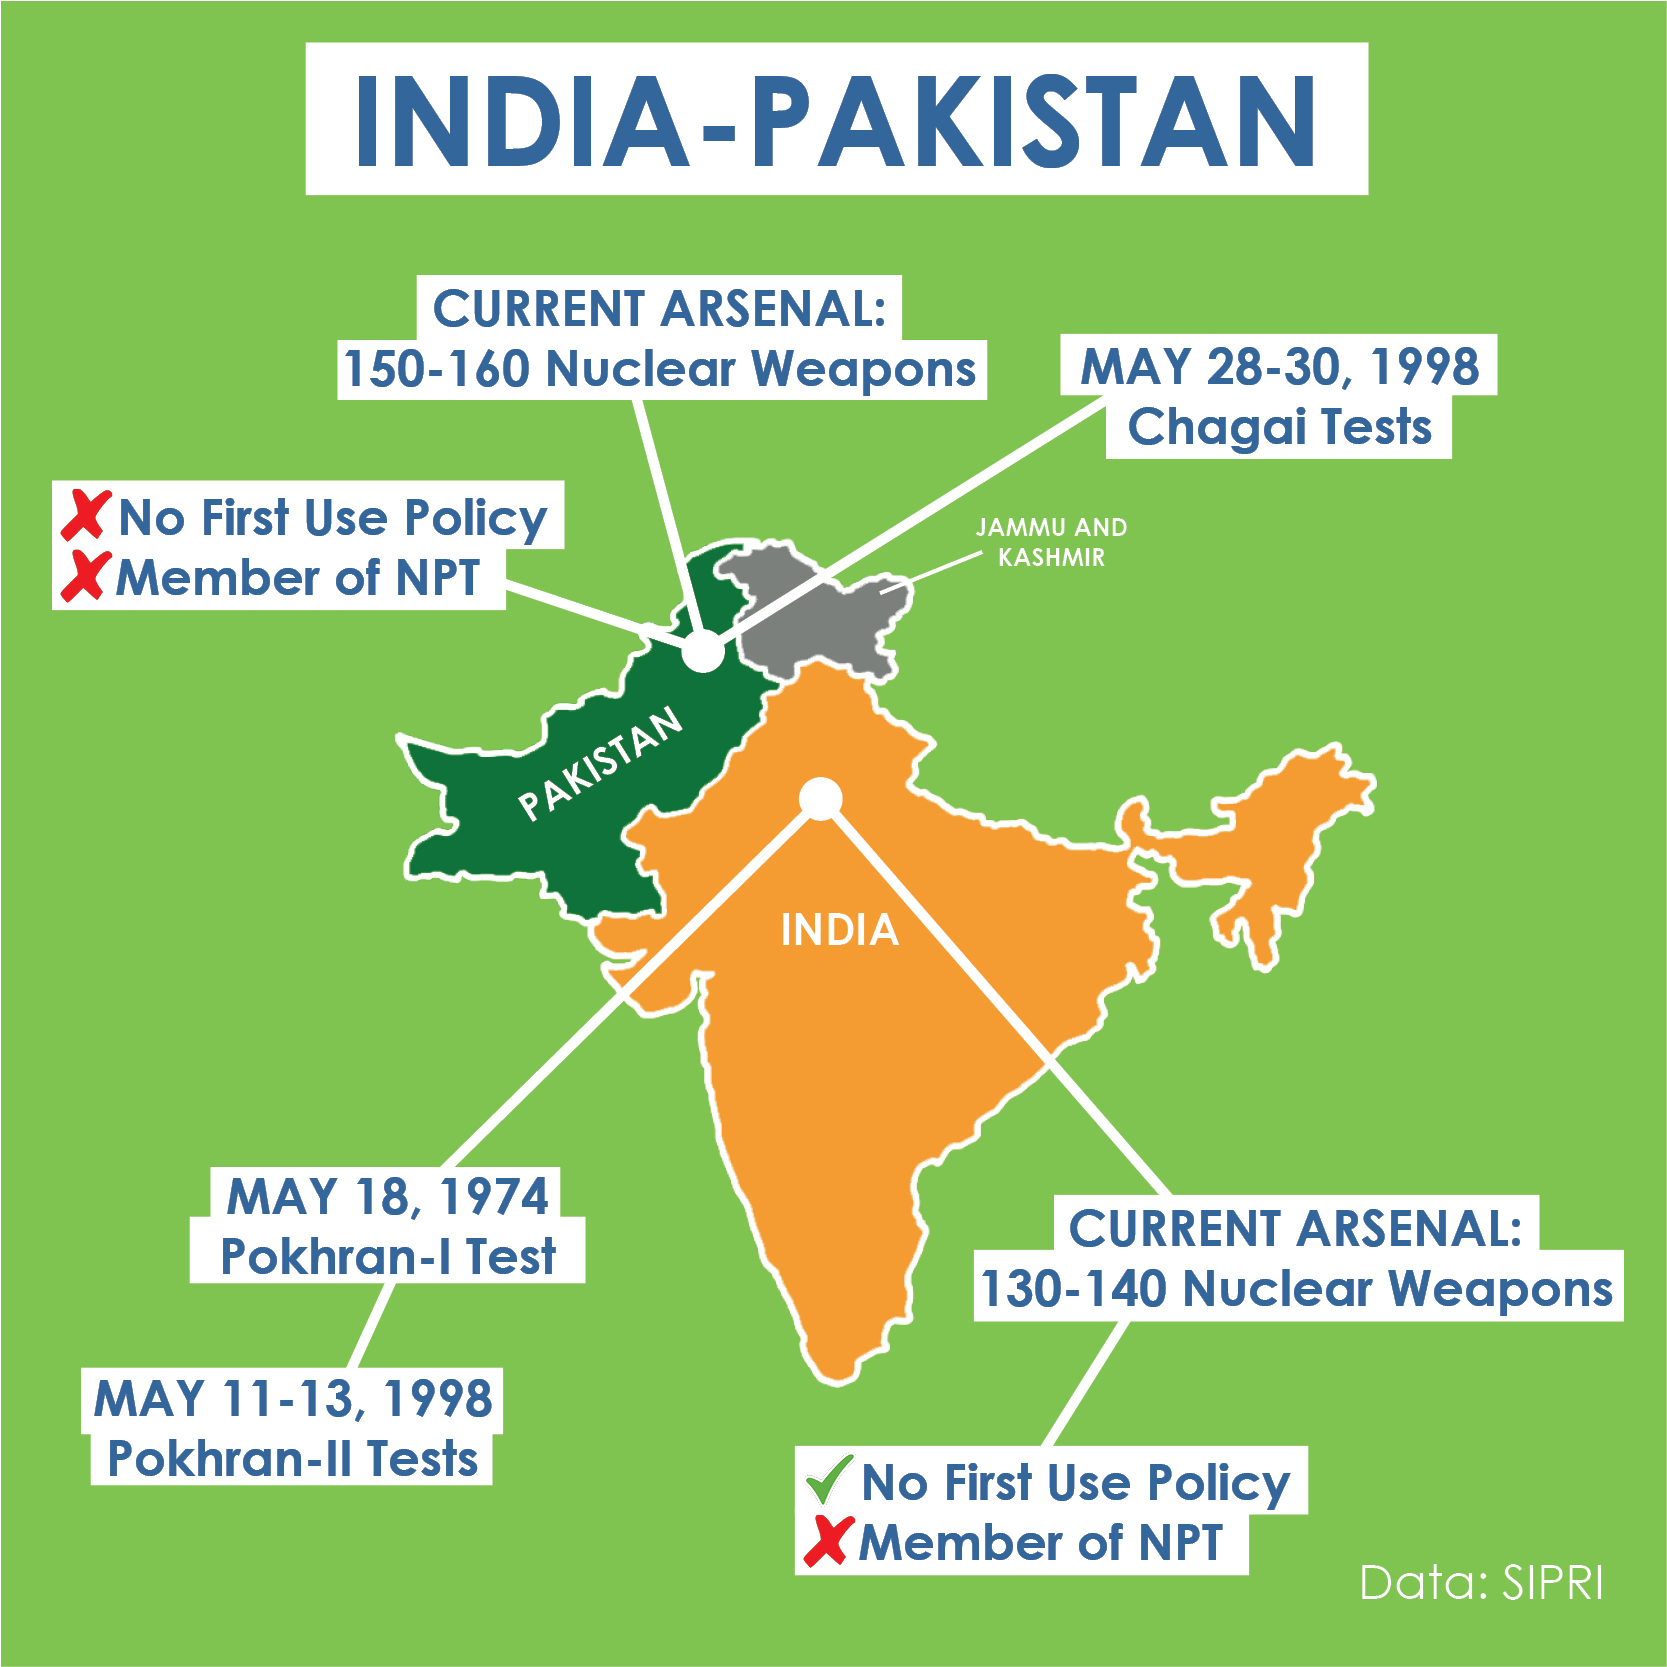 India and Pakistan Center for Arms Control and NonProliferation